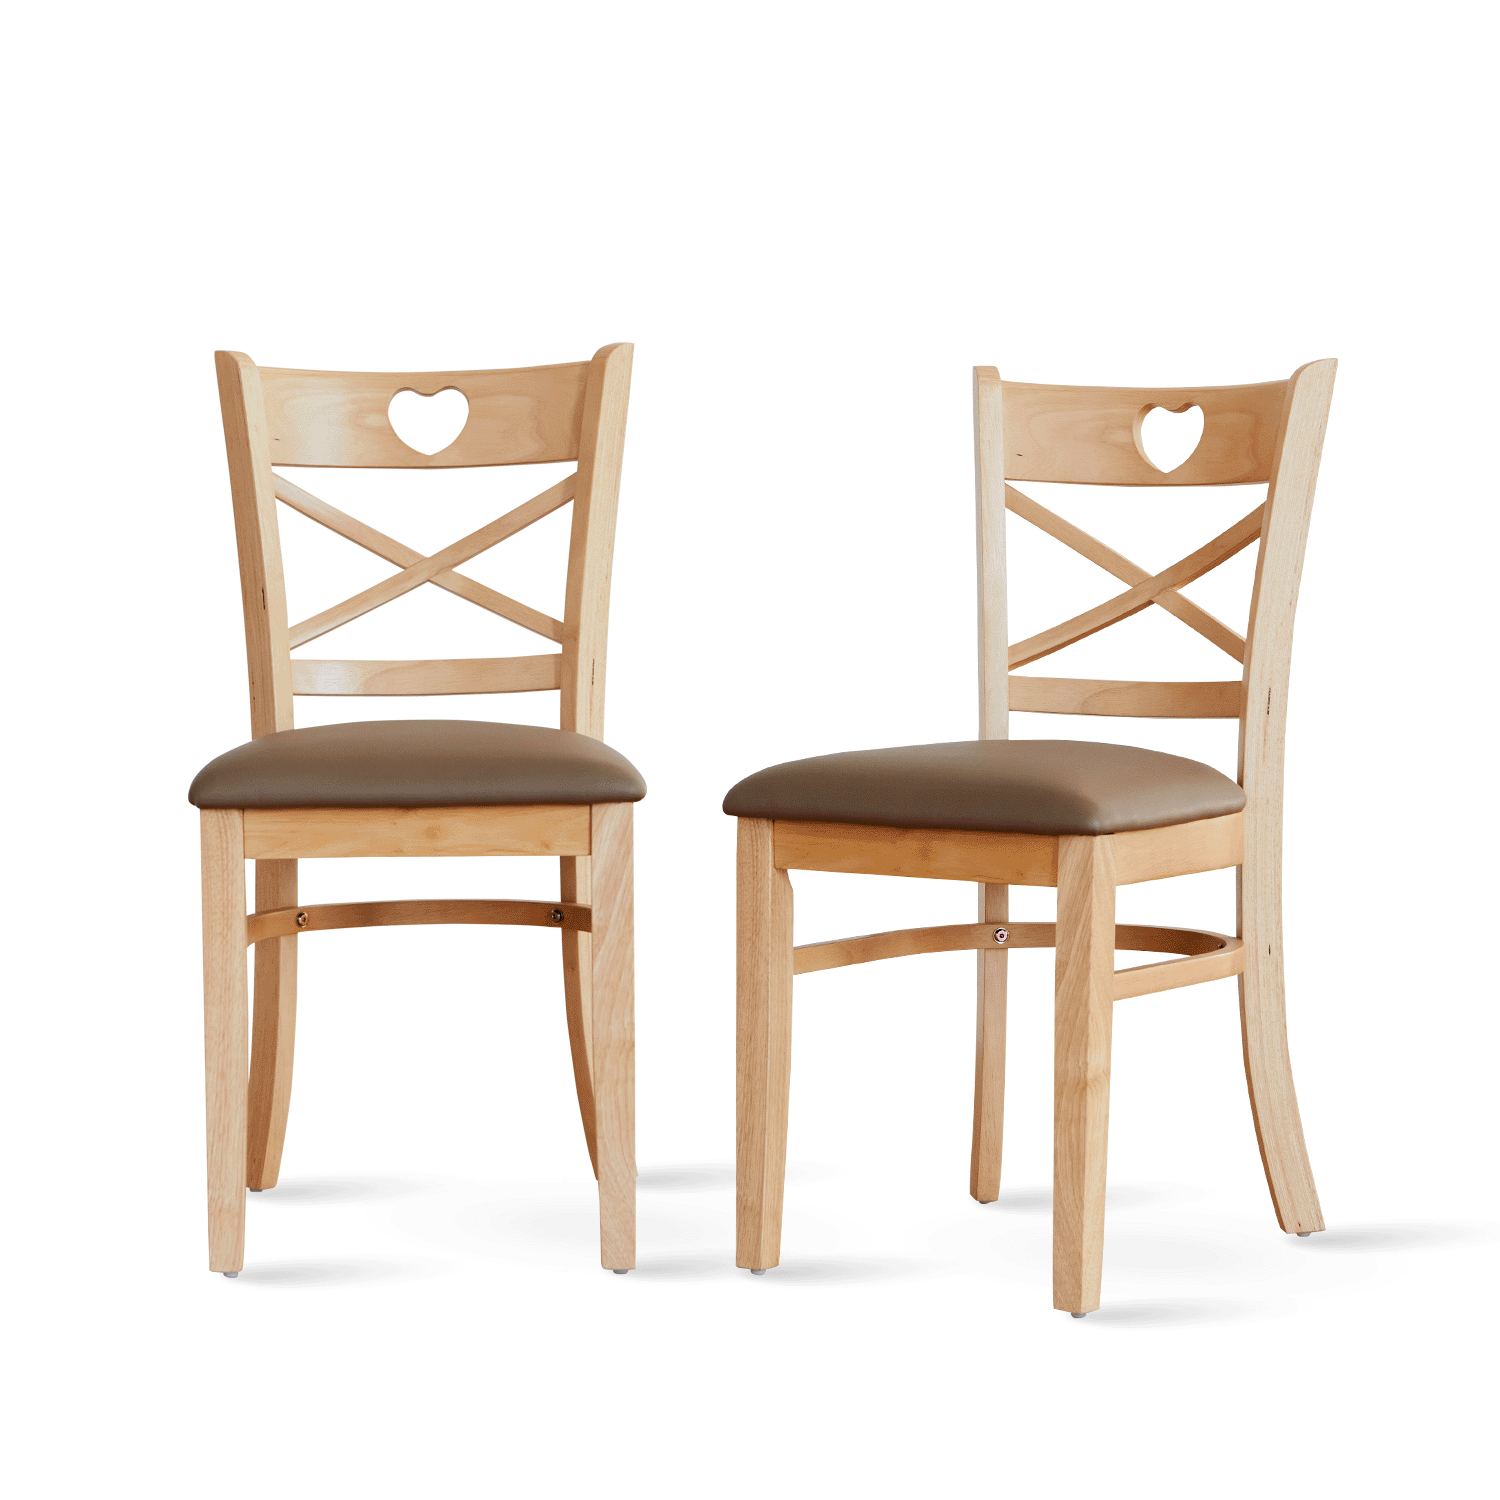 Livinia Home Furniture Heart Cross Back Wooden Dining Chairs Set Of 2 